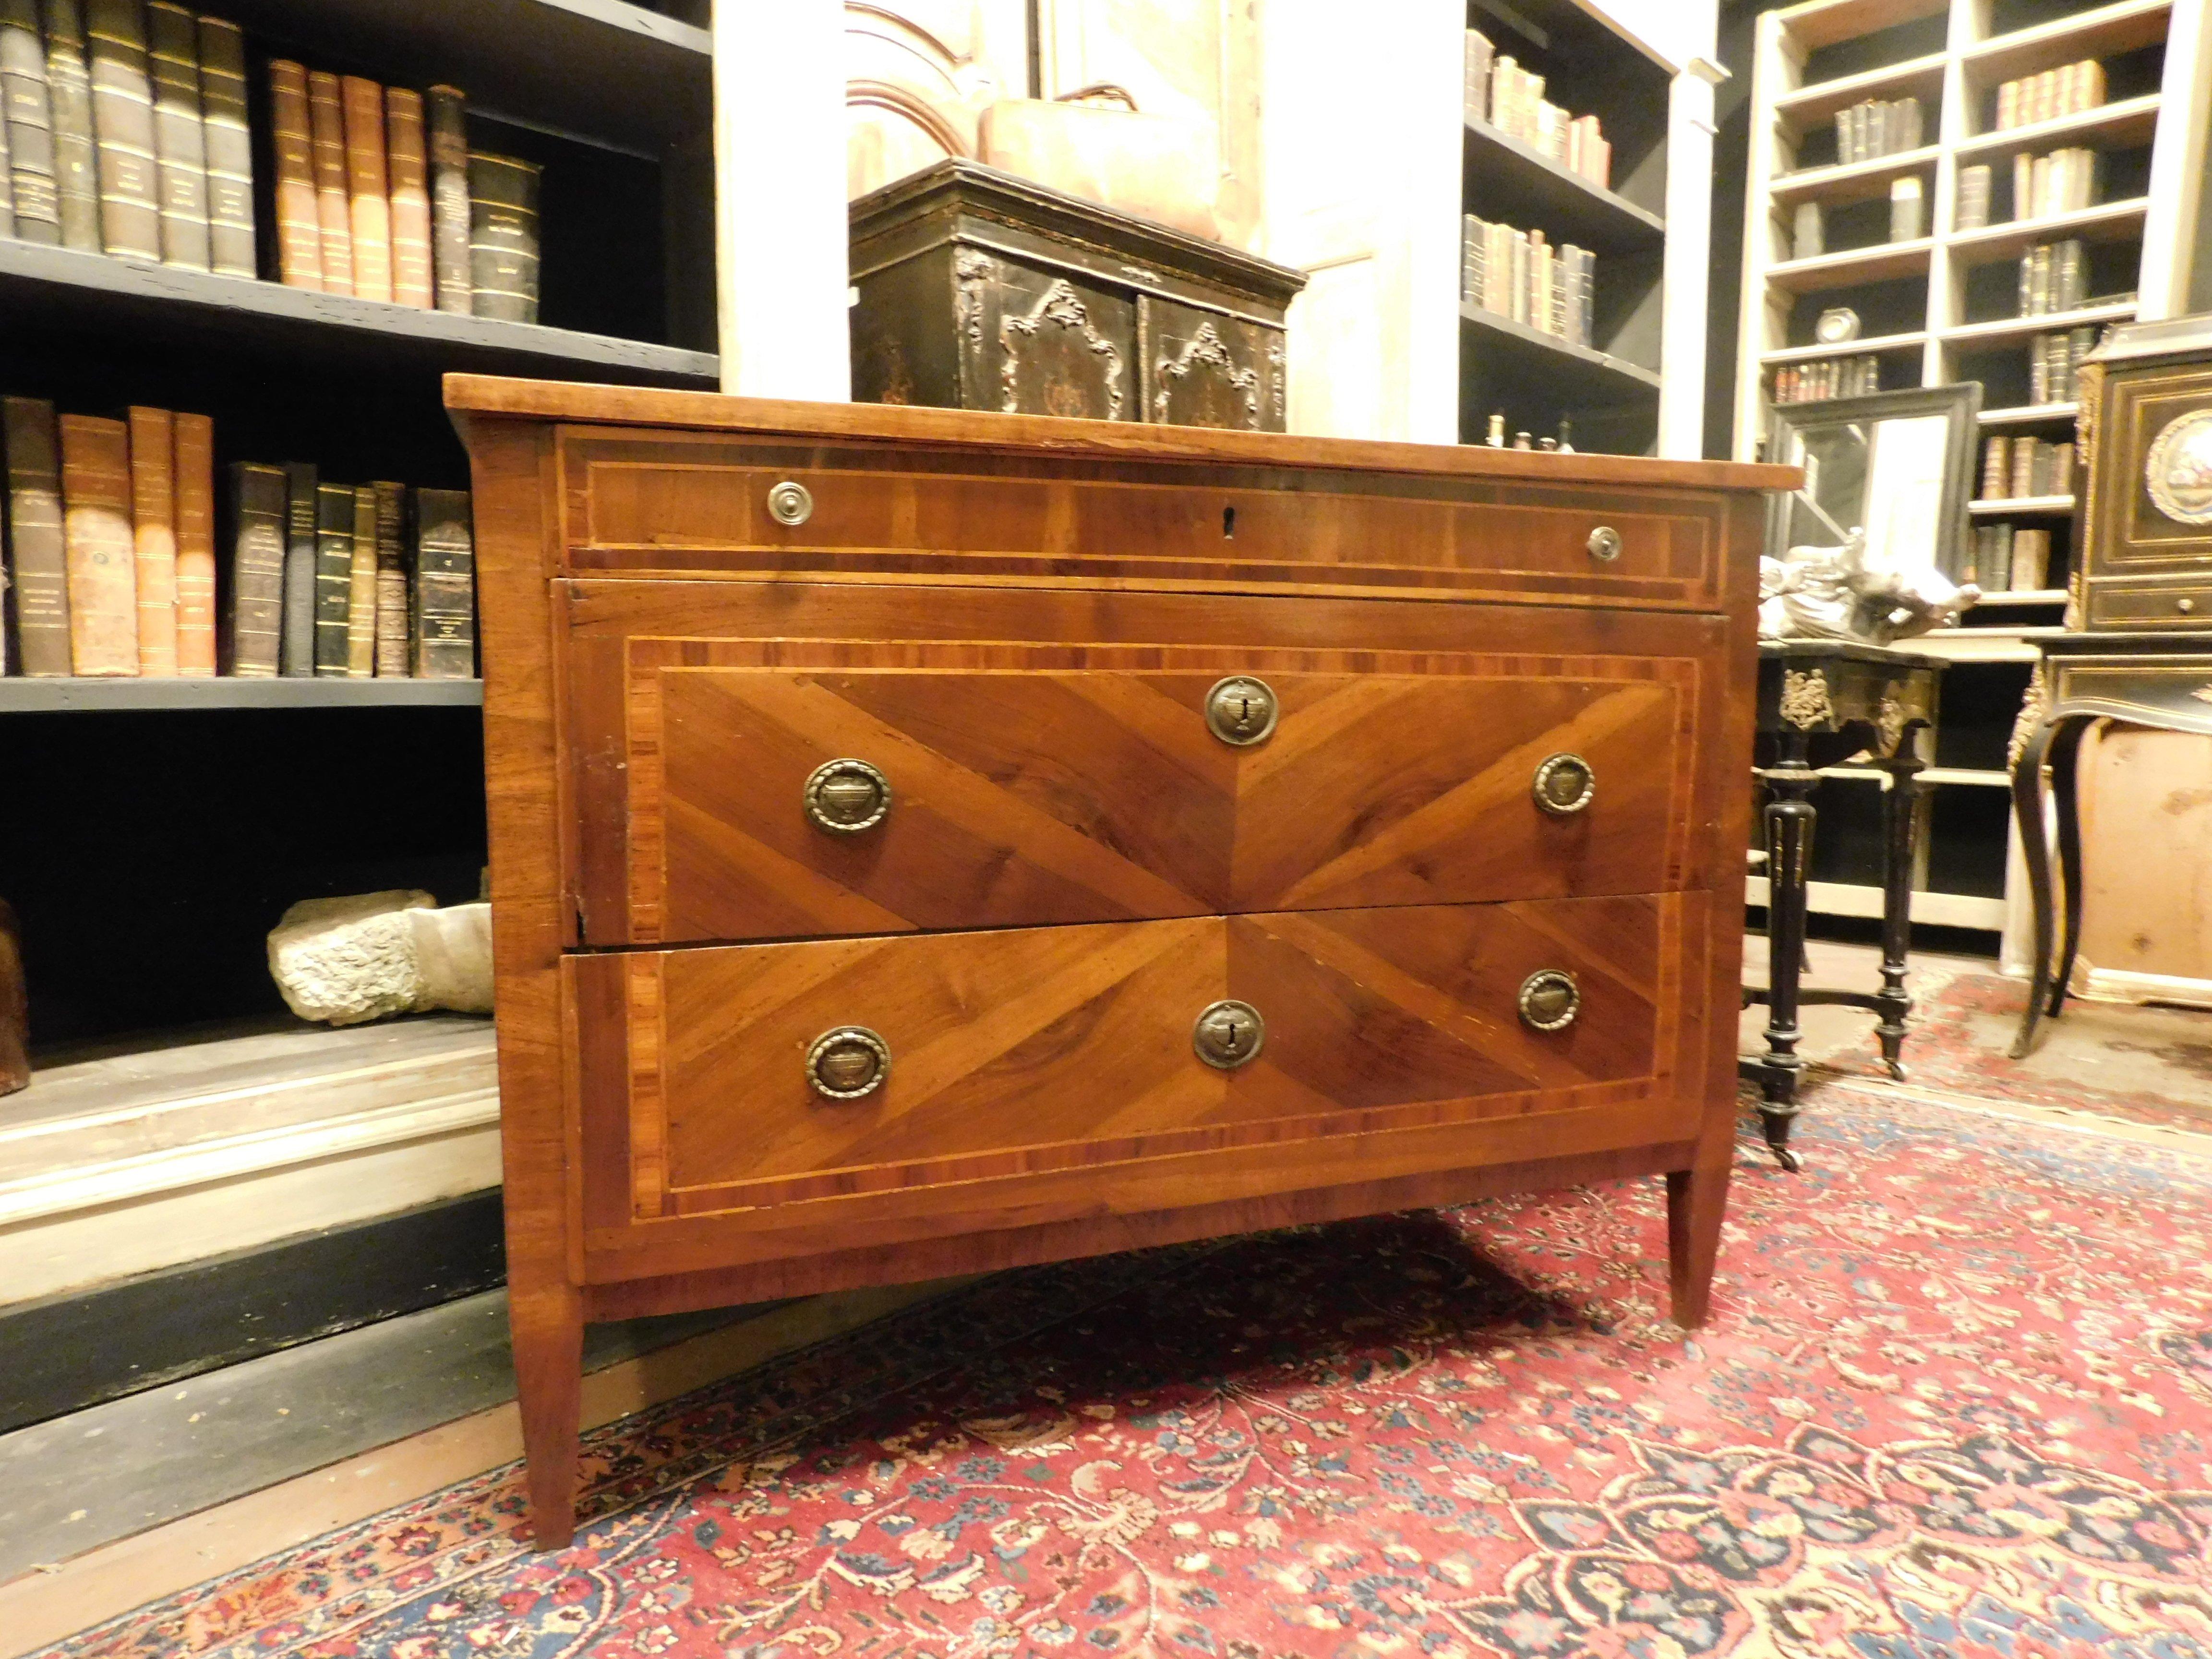 Antique Louis XVI dresser, chest of drawers, veneered and inlaid with highlighted walnut wood (light and dark) with three drawers and original handles, coming from Genoa (Italy) from the 18th century, maximum dimensions cm w 119 x H 87 x D 59.
Ideal